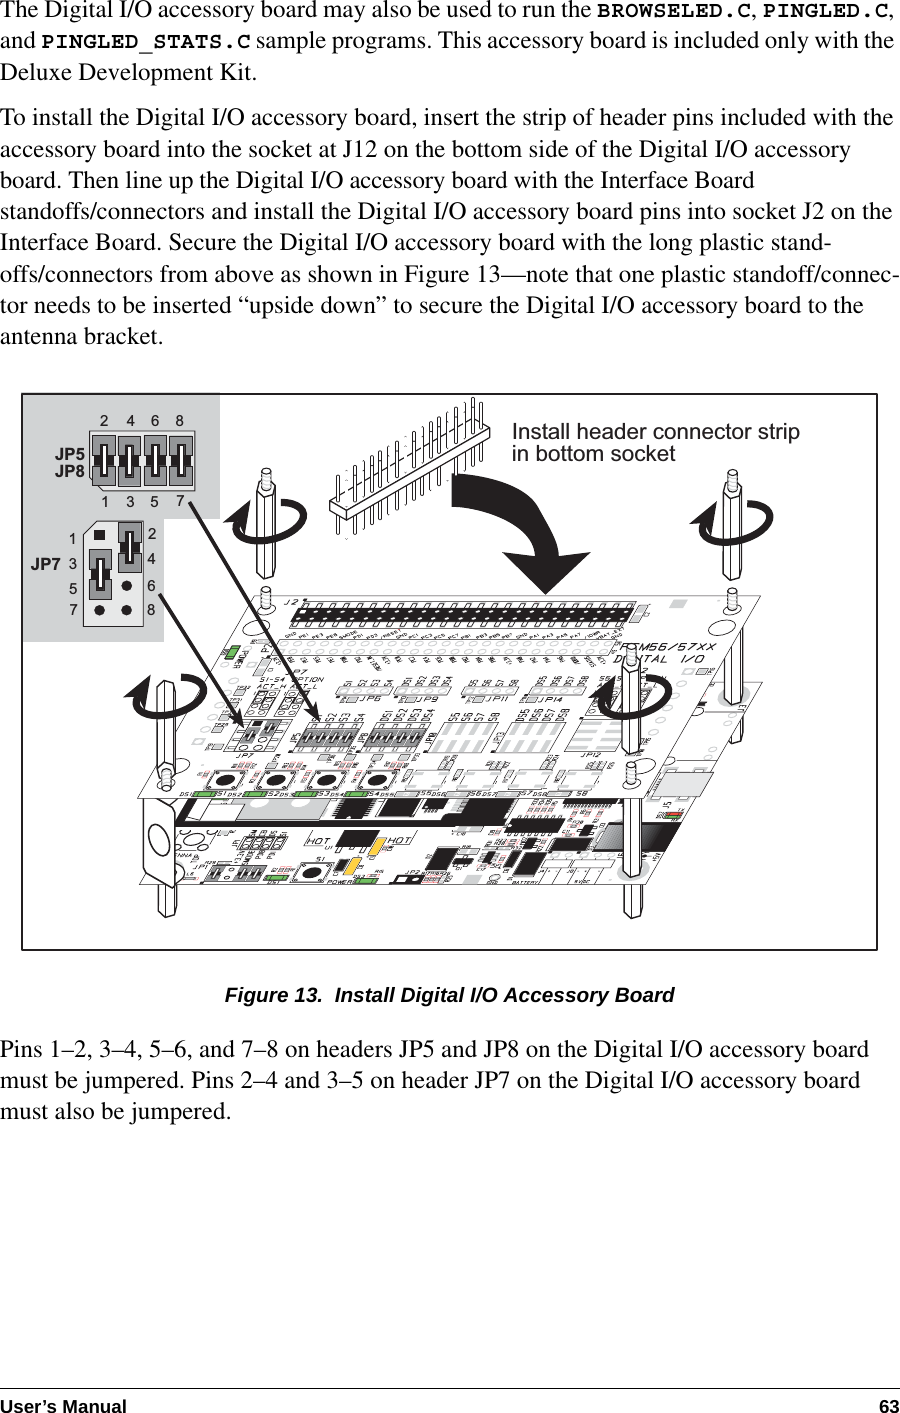 User’s Manual 63The Digital I/O accessory board may also be used to run the BROWSELED.C, PINGLED.C, and PINGLED_STATS.C sample programs. This accessory board is included only with the Deluxe Development Kit.To install the Digital I/O accessory board, insert the strip of header pins included with the accessory board into the socket at J12 on the bottom side of the Digital I/O accessory board. Then line up the Digital I/O accessory board with the Interface Board standoffs/connectors and install the Digital I/O accessory board pins into socket J2 on the Interface Board. Secure the Digital I/O accessory board with the long plastic stand-offs/connectors from above as shown in Figure 13—note that one plastic standoff/connec-tor needs to be inserted “upside down” to secure the Digital I/O accessory board to the antenna bracket.Figure 13.  Install Digital I/O Accessory BoardPins 1–2, 3–4, 5–6, and 7–8 on headers JP5 and JP8 on the Digital I/O accessory board must be jumpered. Pins 2–4 and 3–5 on header JP7 on the Digital I/O accessory board must also be jumpered.   JP5JP84321657843216578JP7Install header connector stripin bottom socket